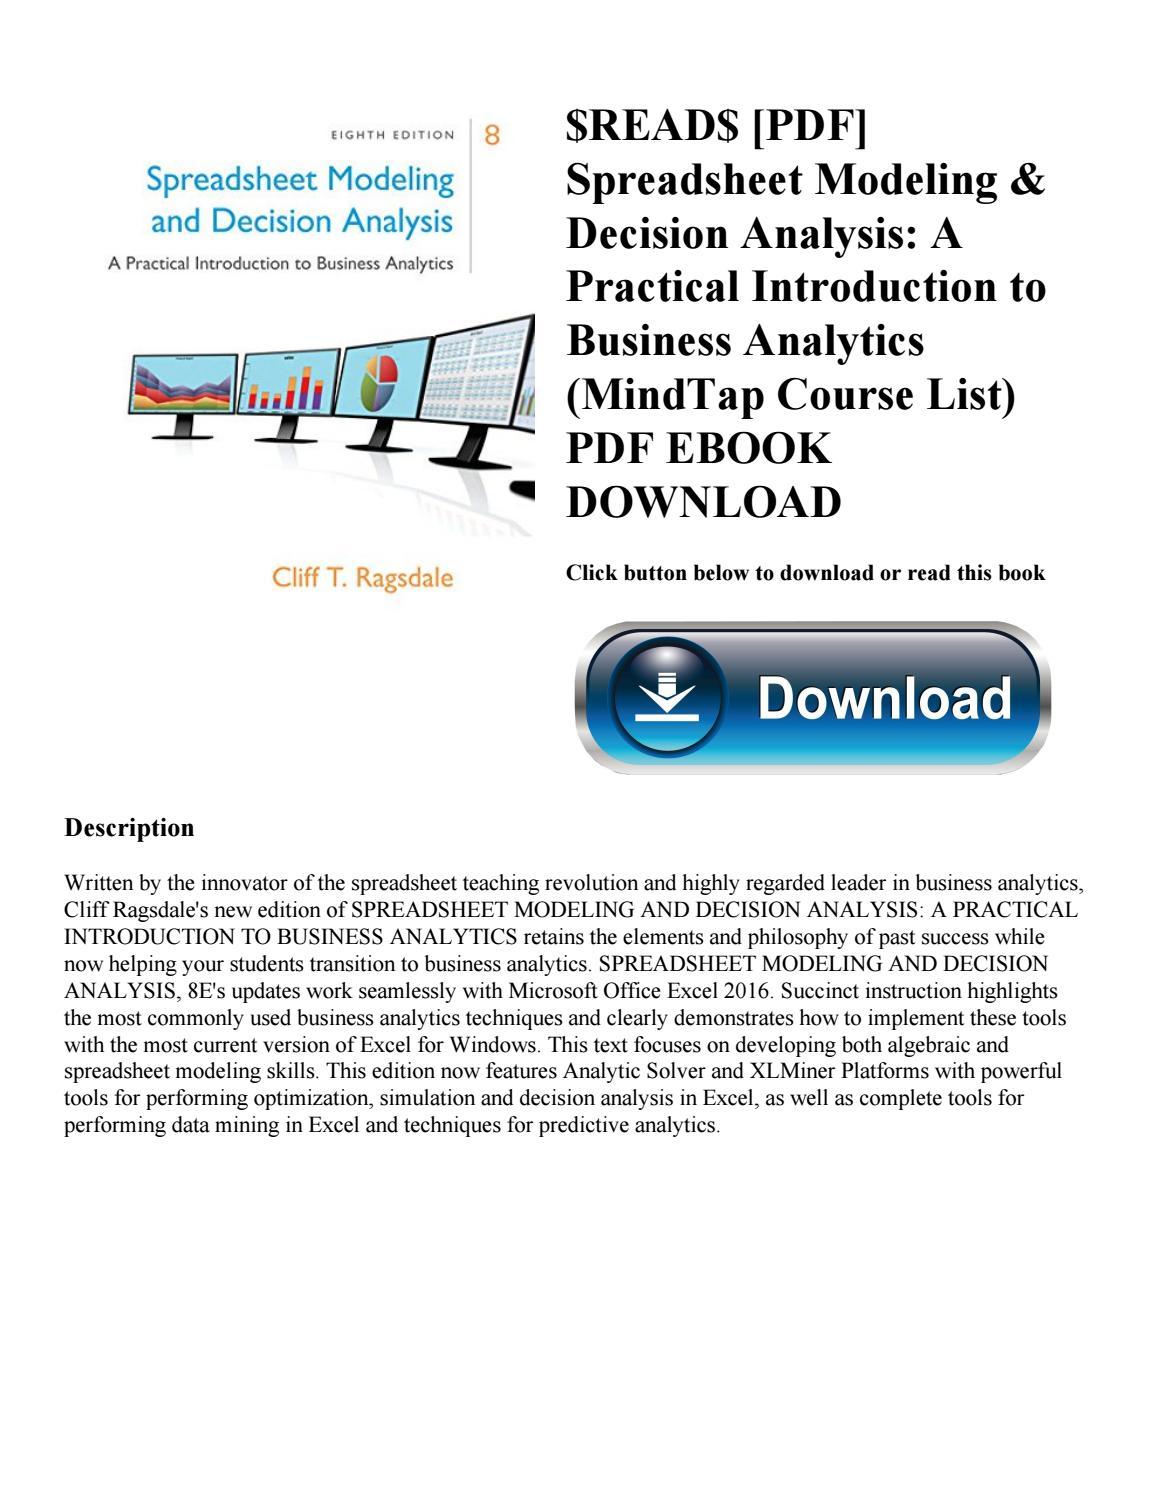 Spreadsheet Modeling And Decision Analysis 8Th Edition Pdf With Read$ [Pdf] Spreadsheet Modeling  Decision Analysis A Practical